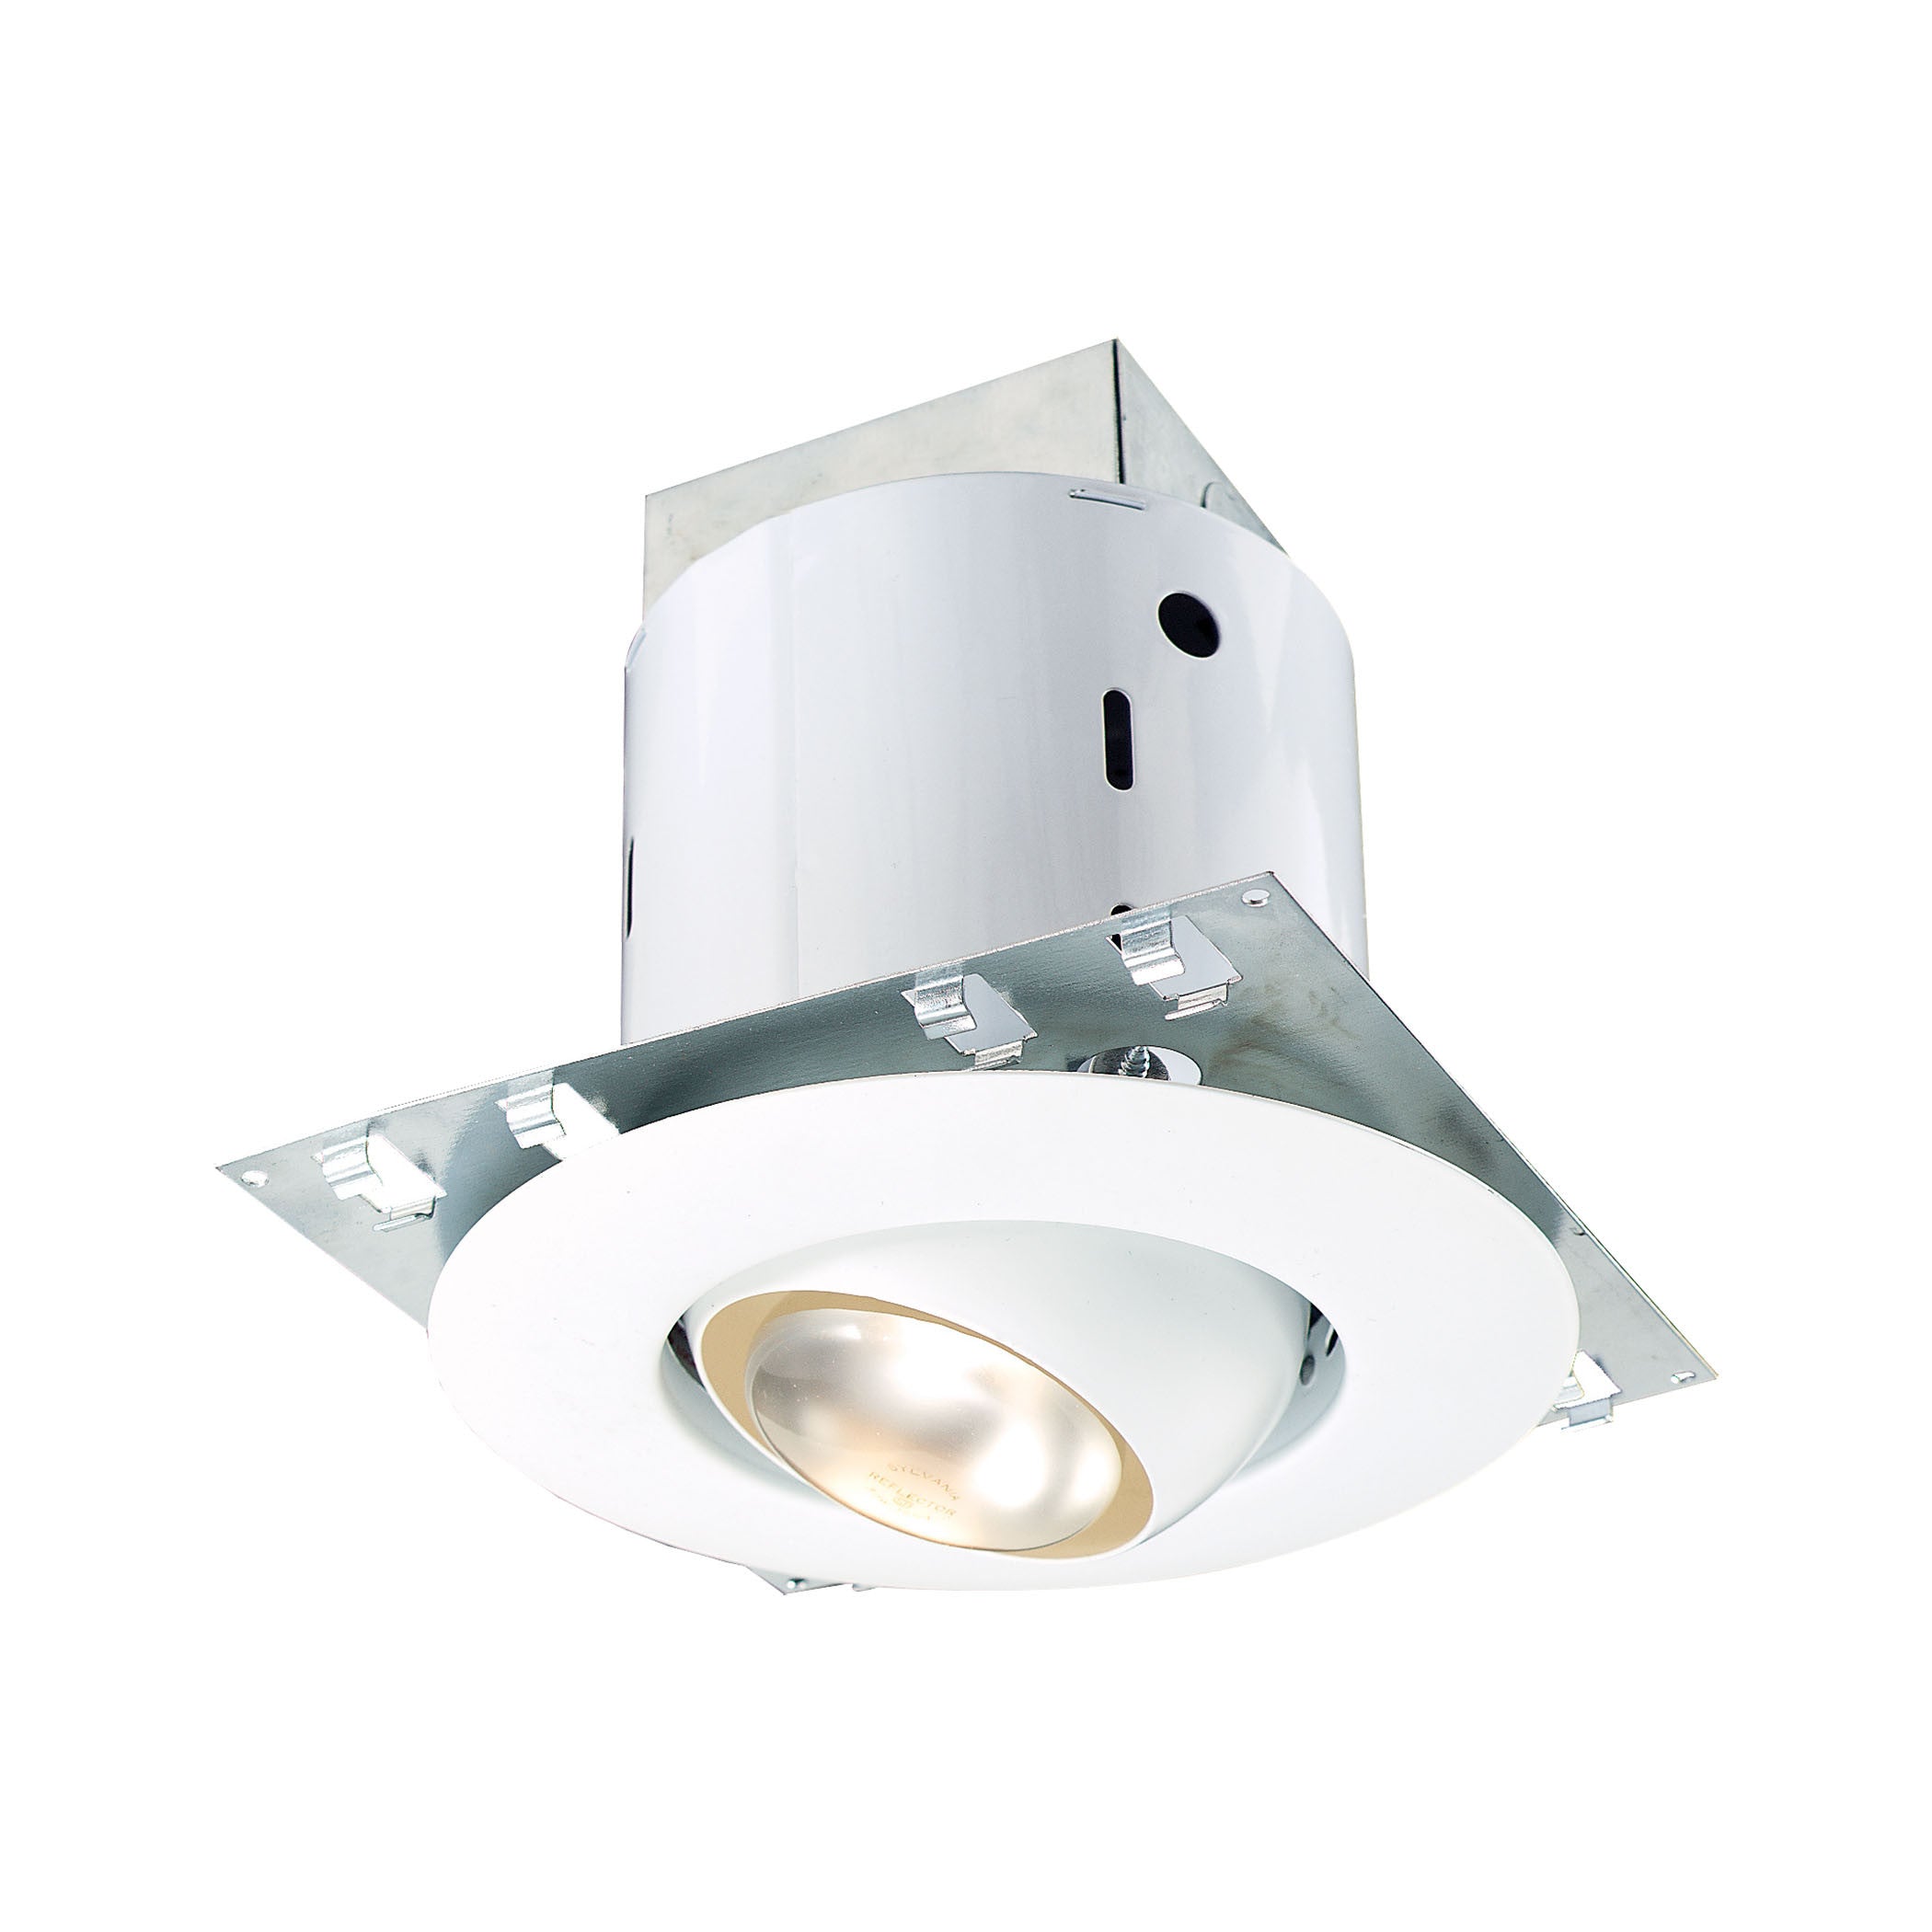 Thomas Lighting Dy6410 Recessed Kit Collection White Finish Transitional Recessed